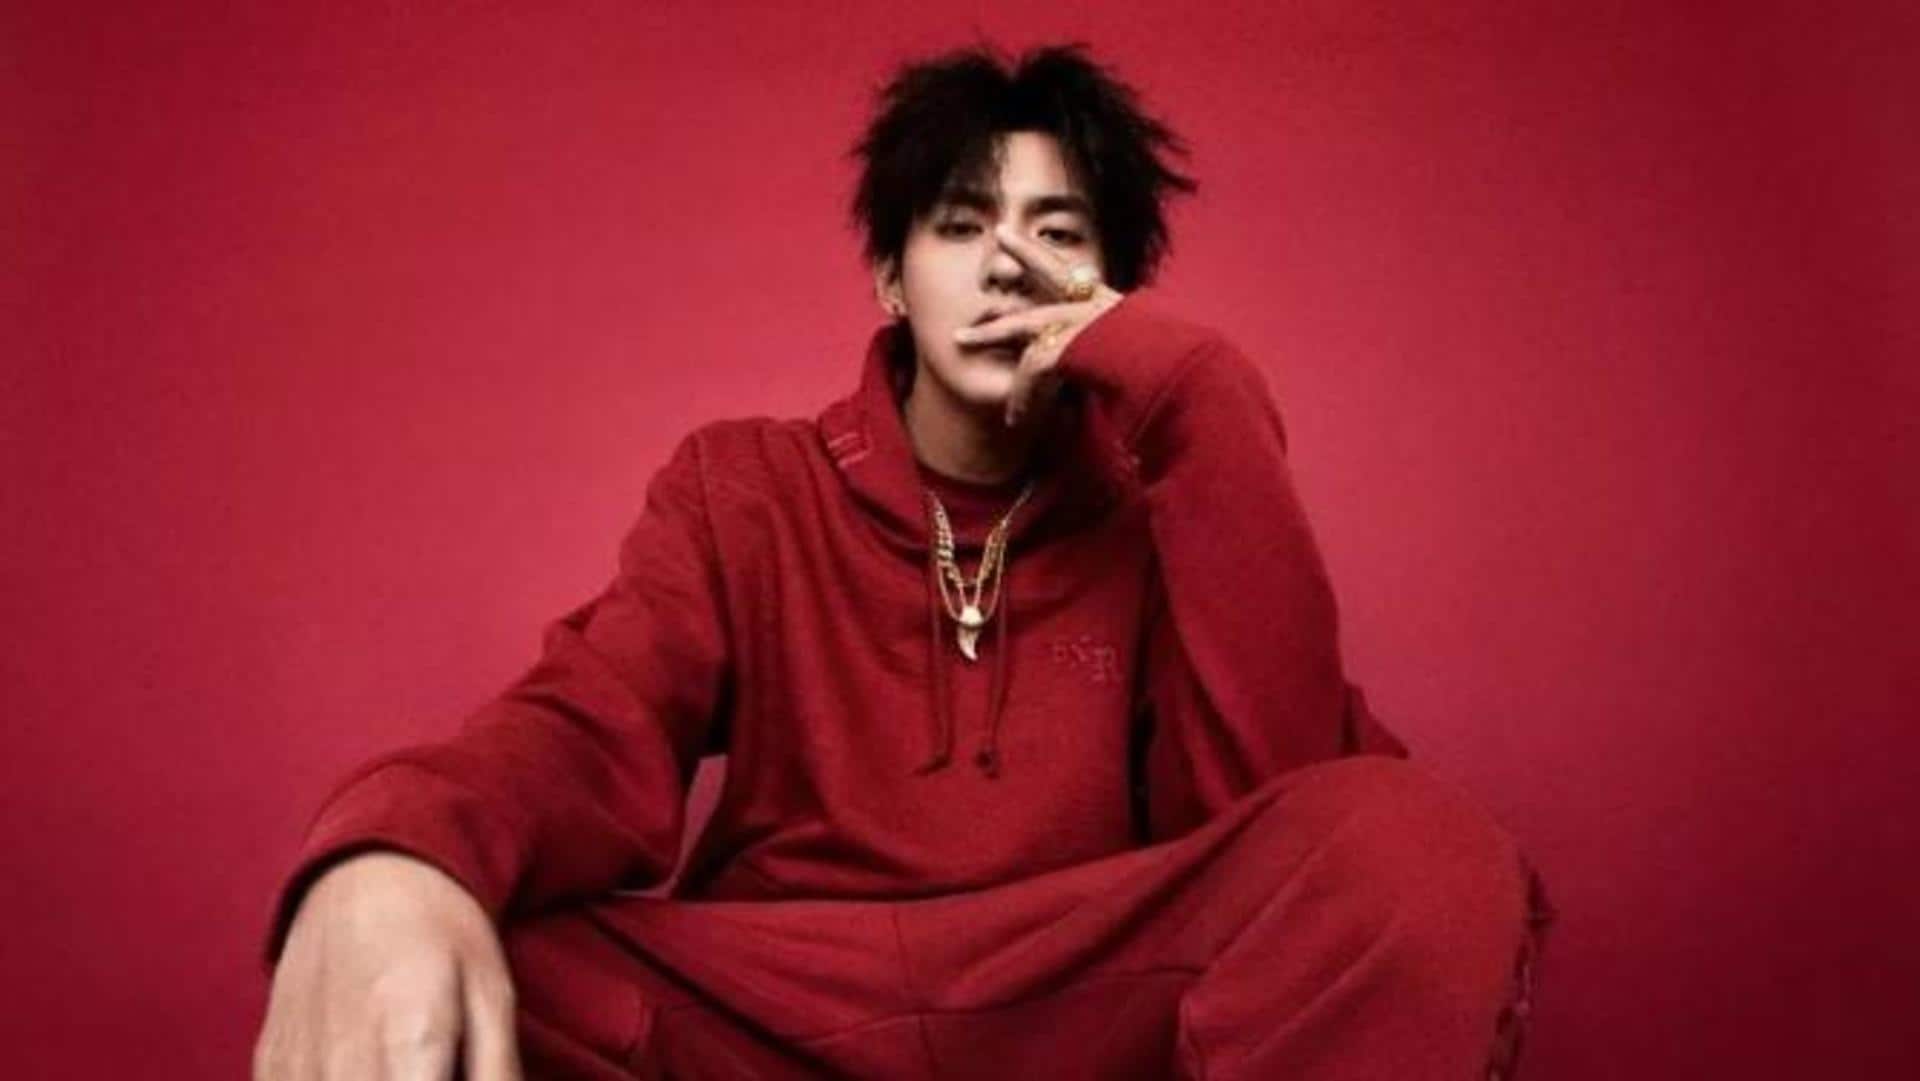 Chinese-Canadian musician Kris Wu jailed for 13 years for rape